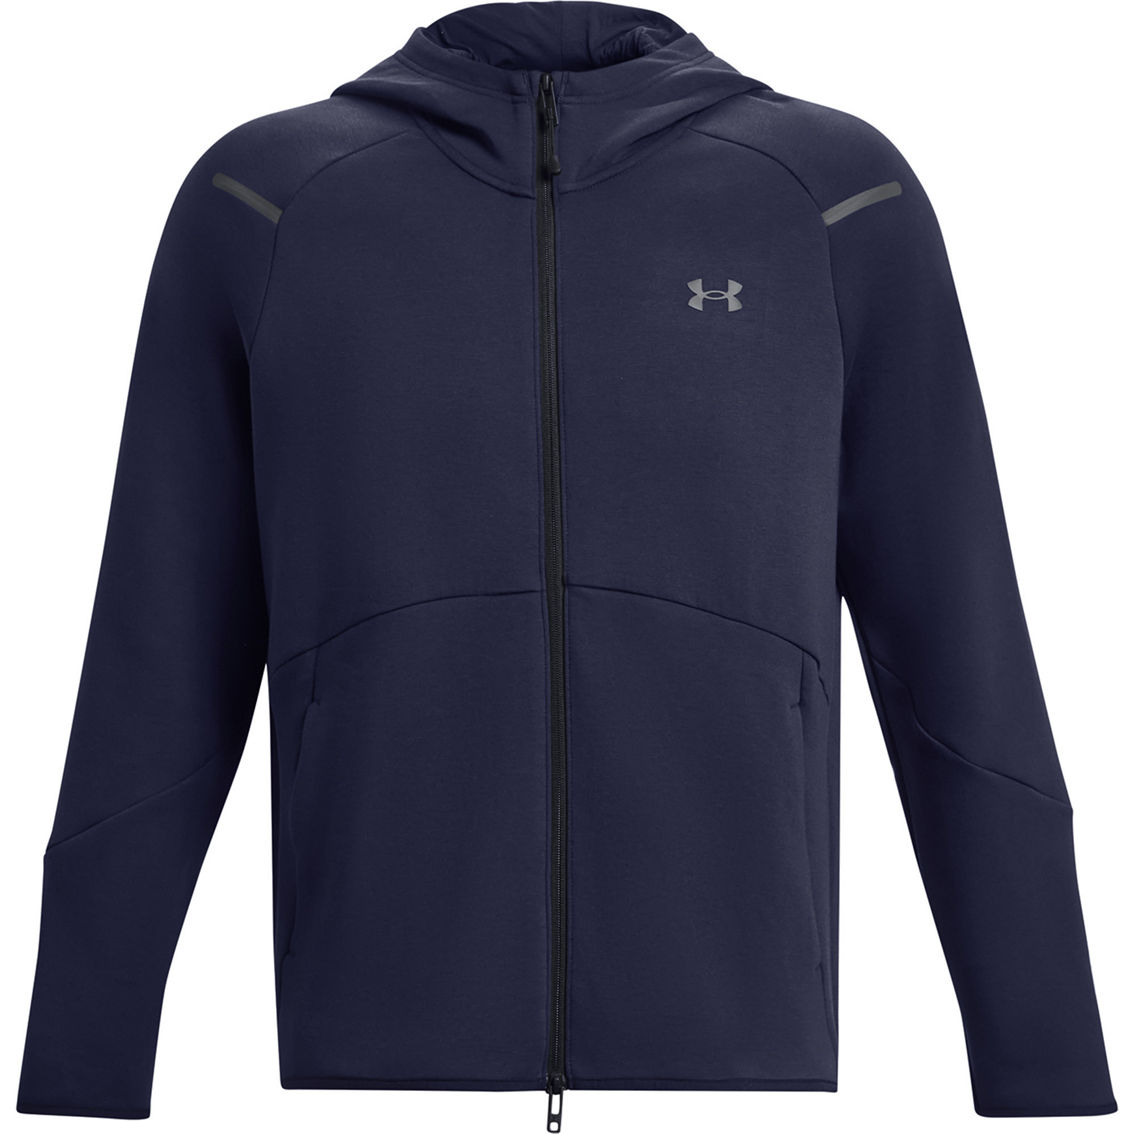 Under Armour Unstoppable Fleece Full Zip - Image 5 of 6